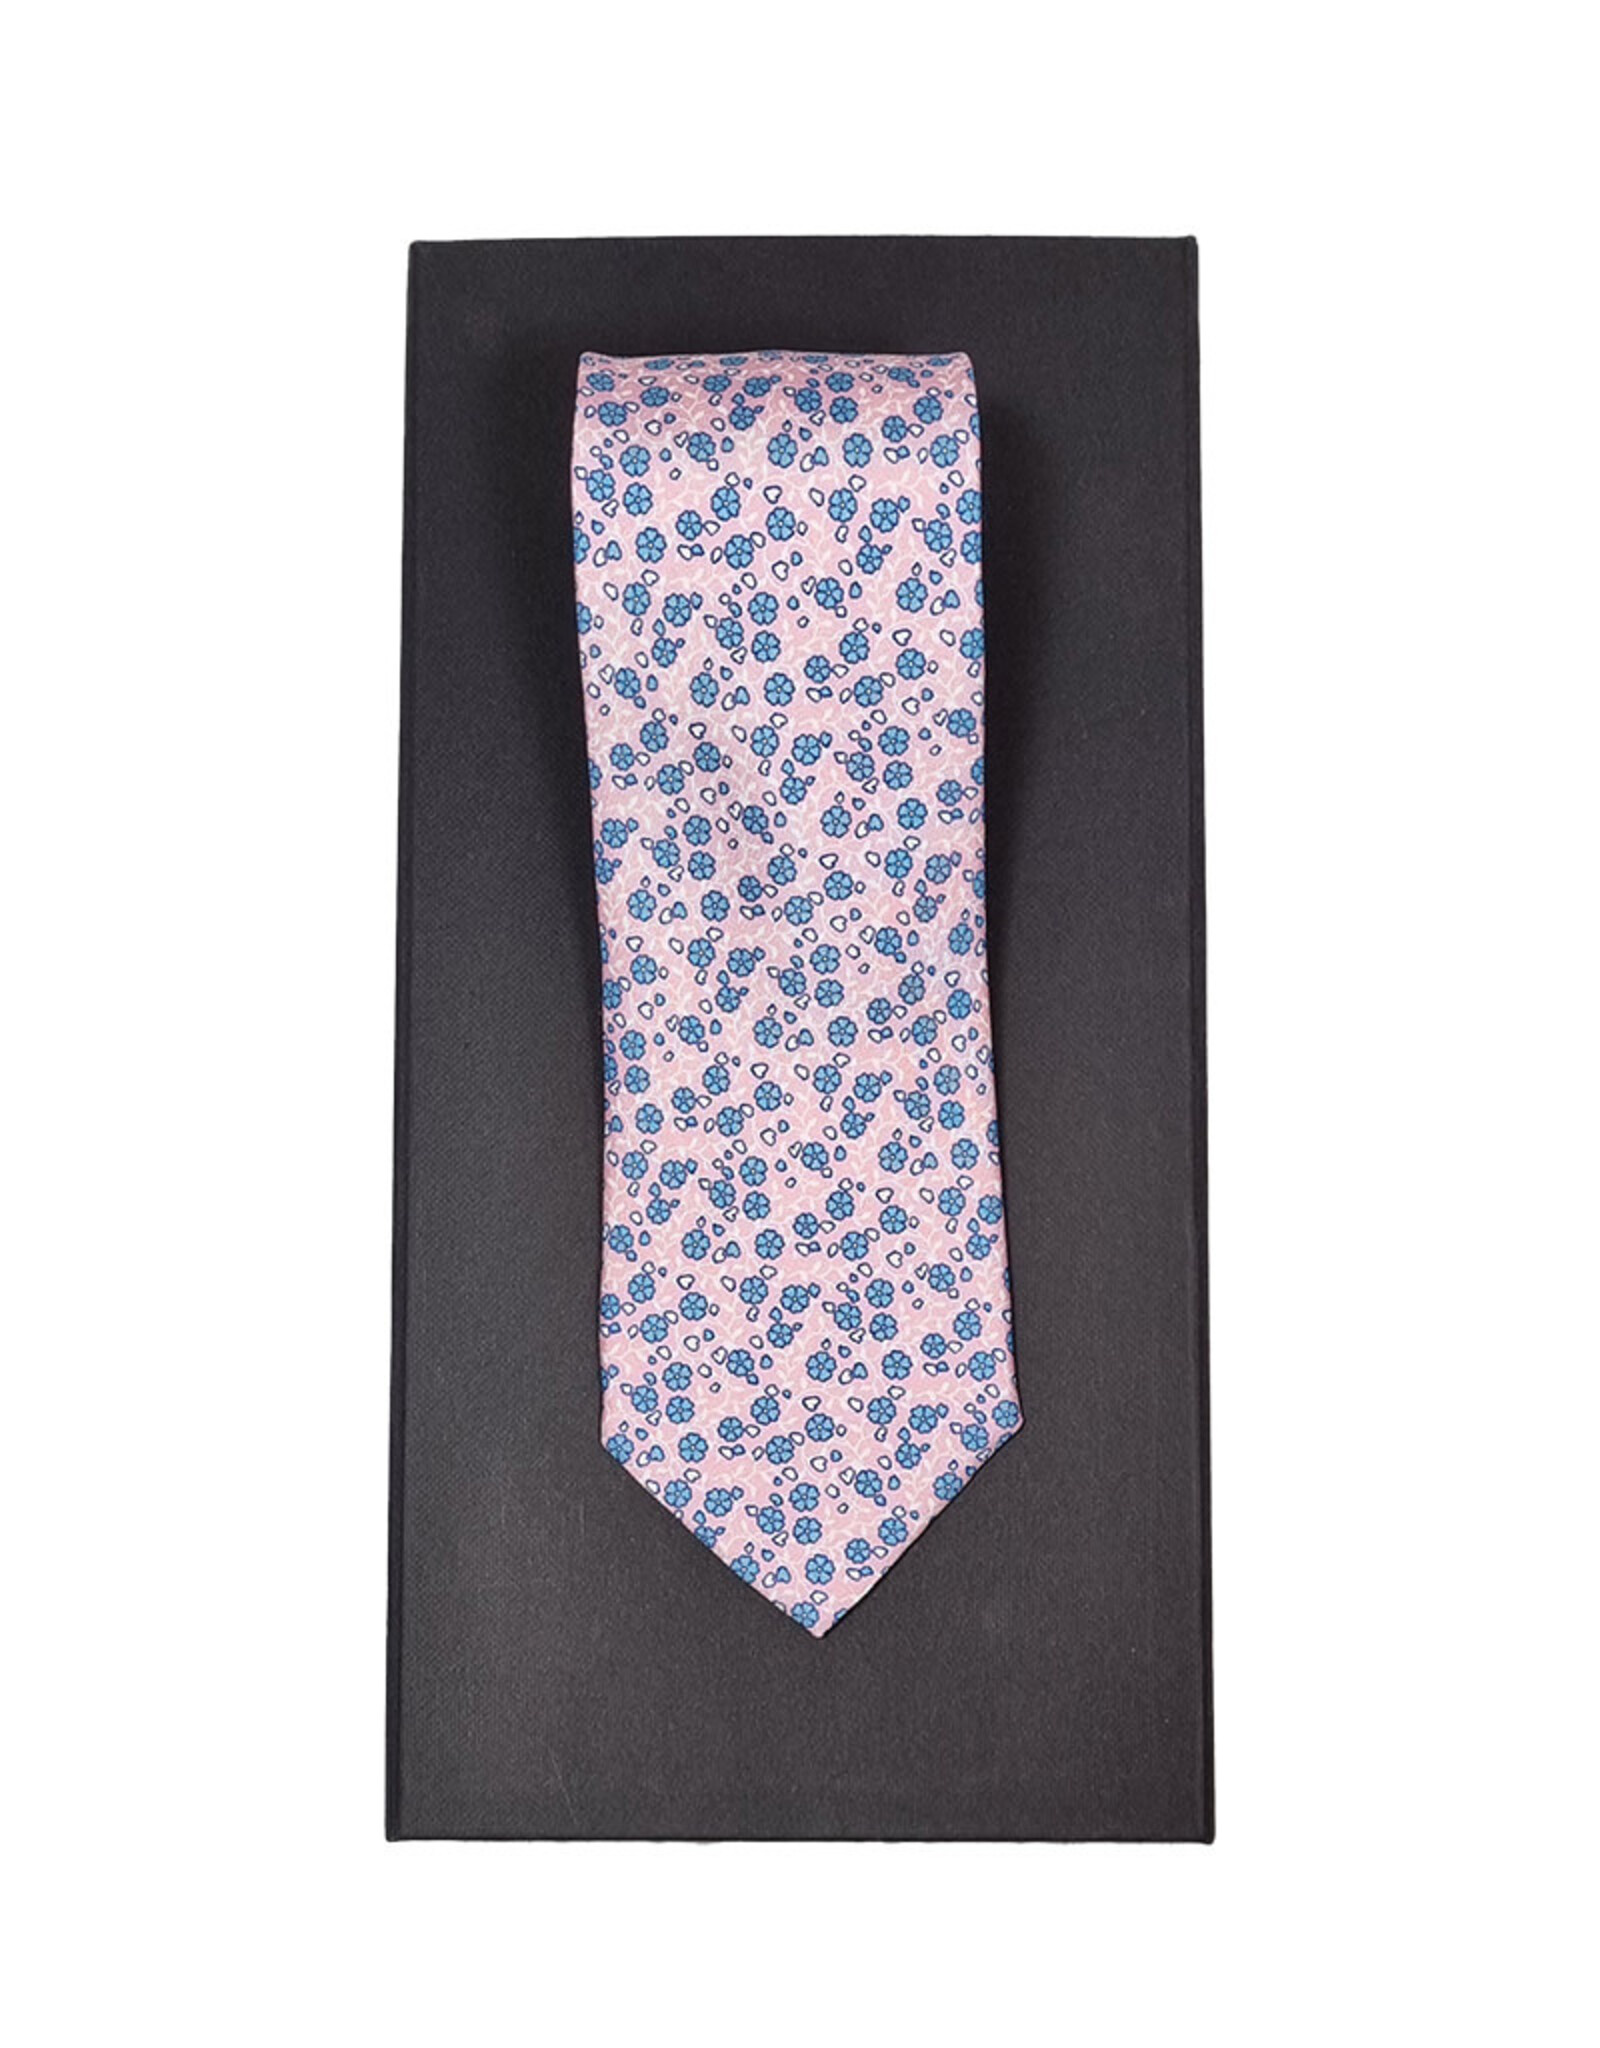 Calabrese Calabrese tie pink flowers 7942012/013